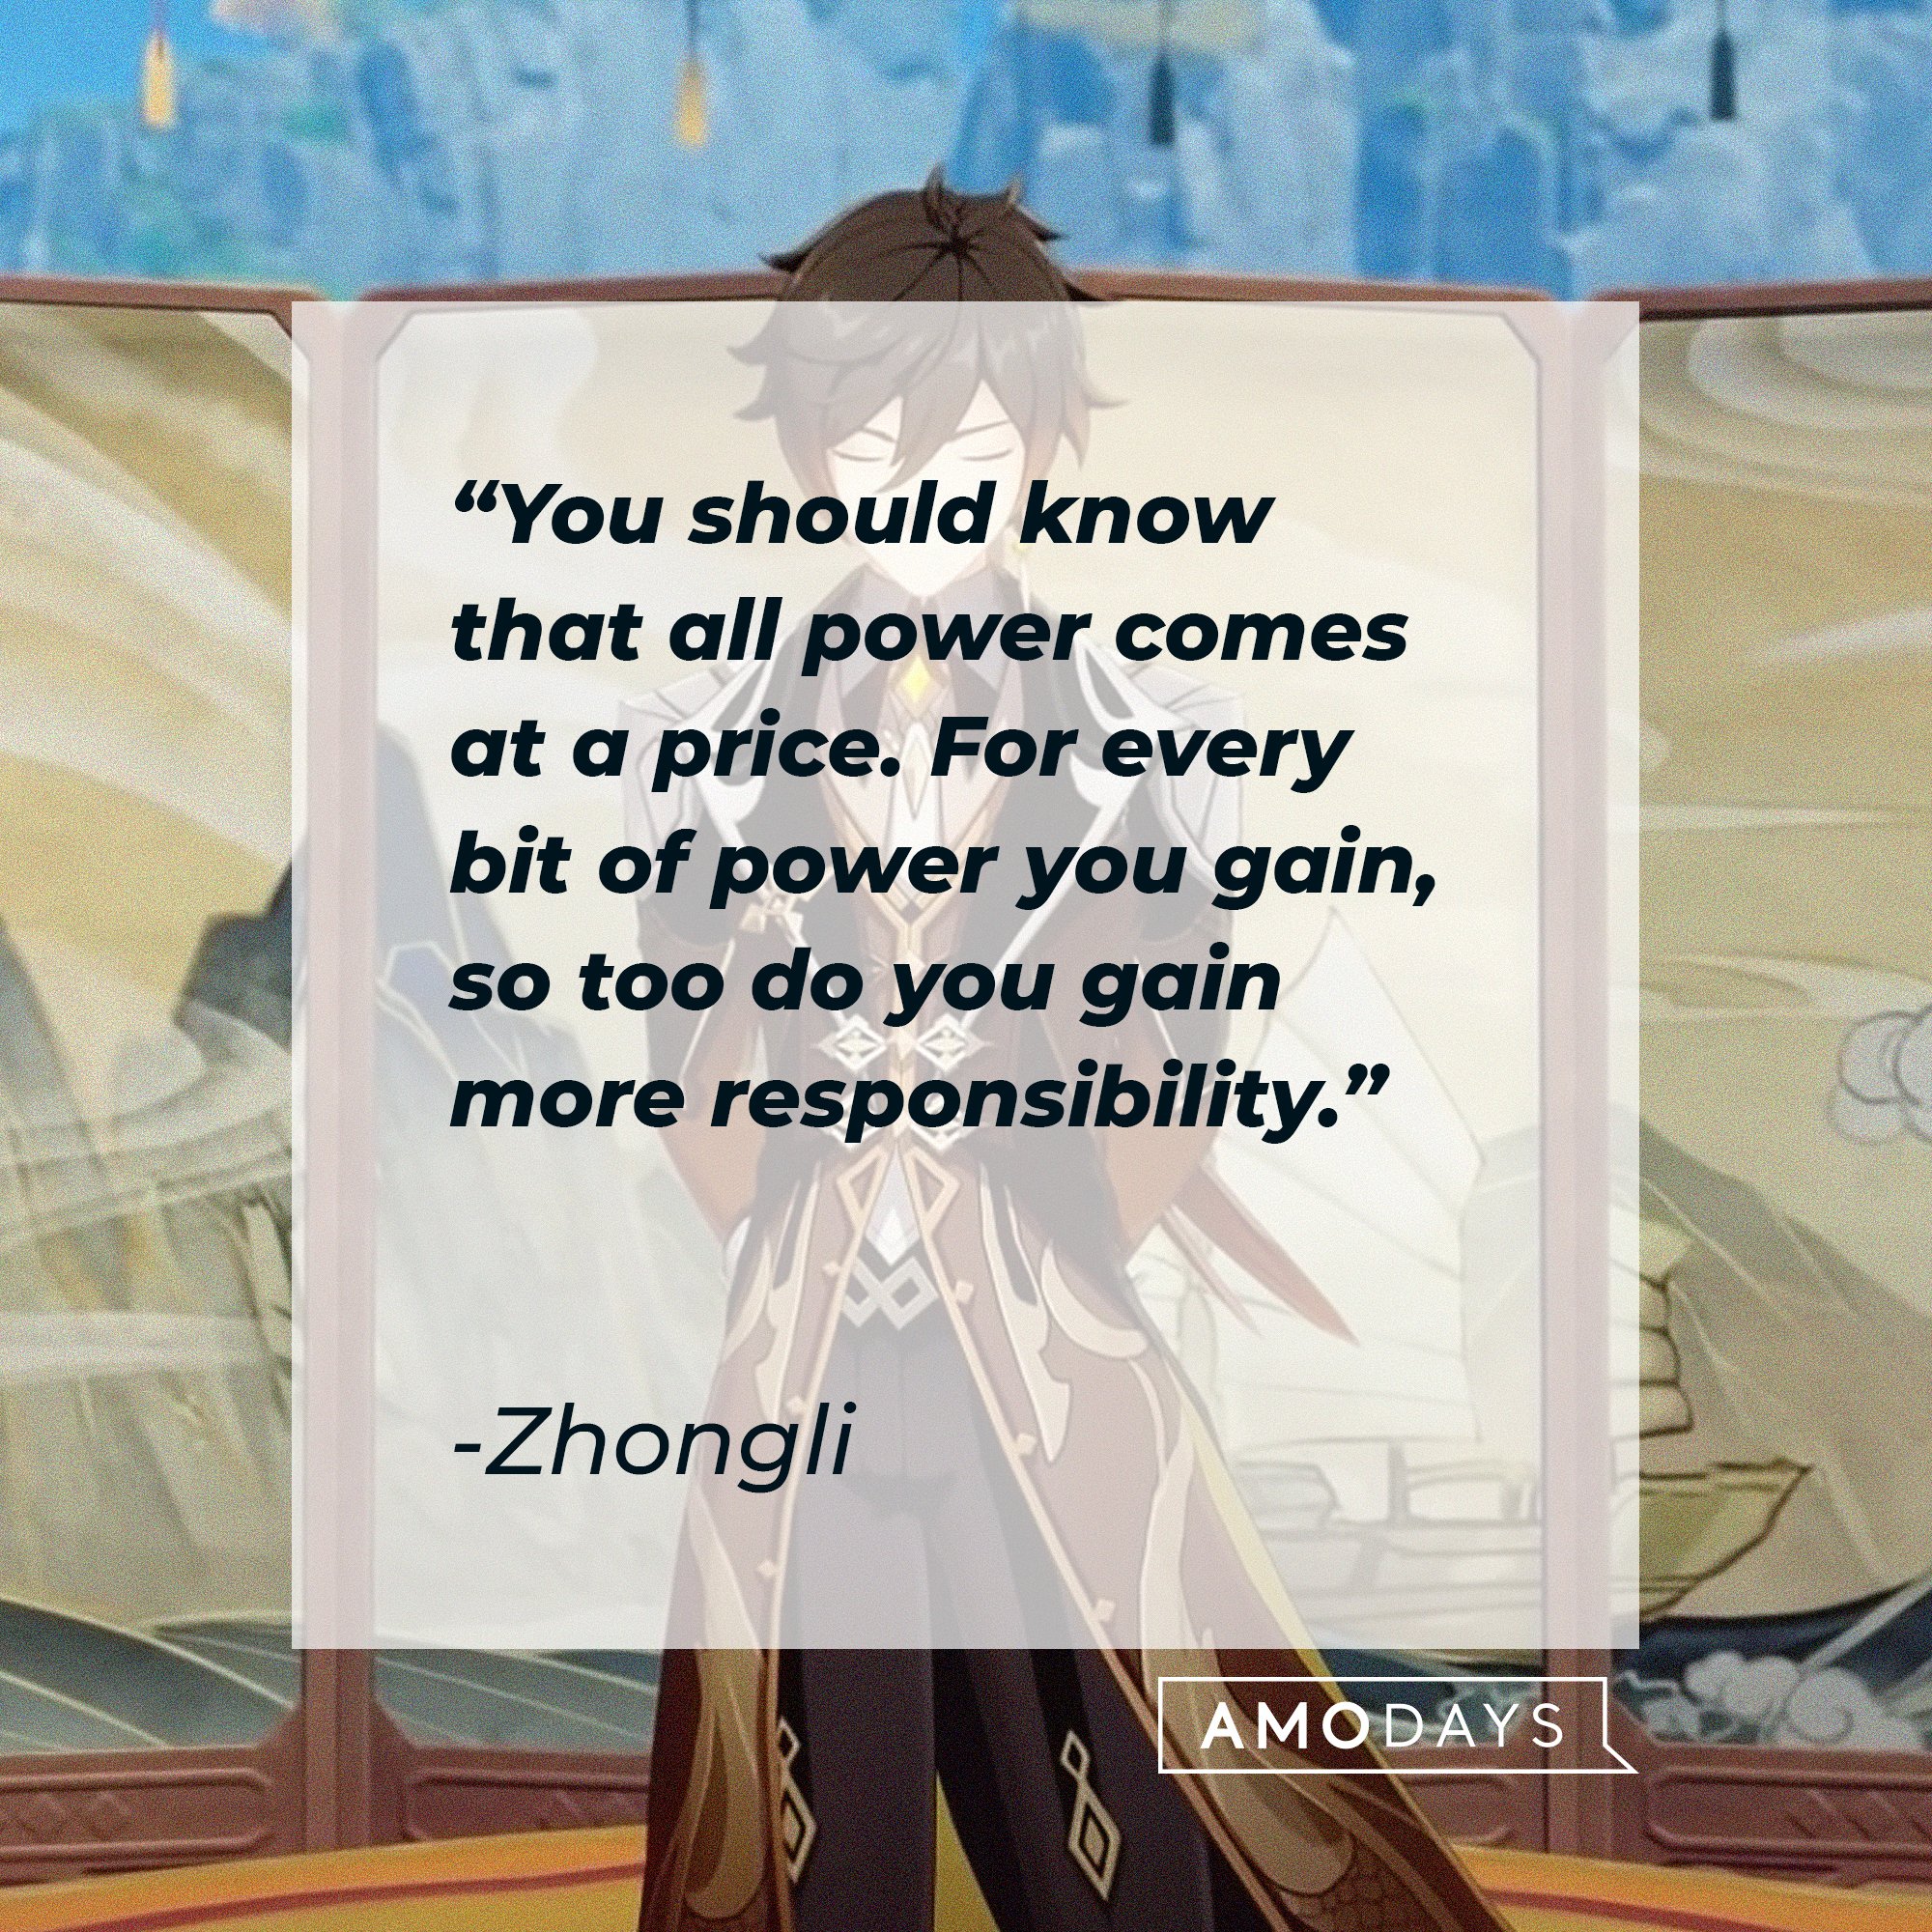  Zhongli’s quote: "You should know that all power comes at a price. For every bit of power you gain, so too do you gain more responsibility." | Image: AmoDays 